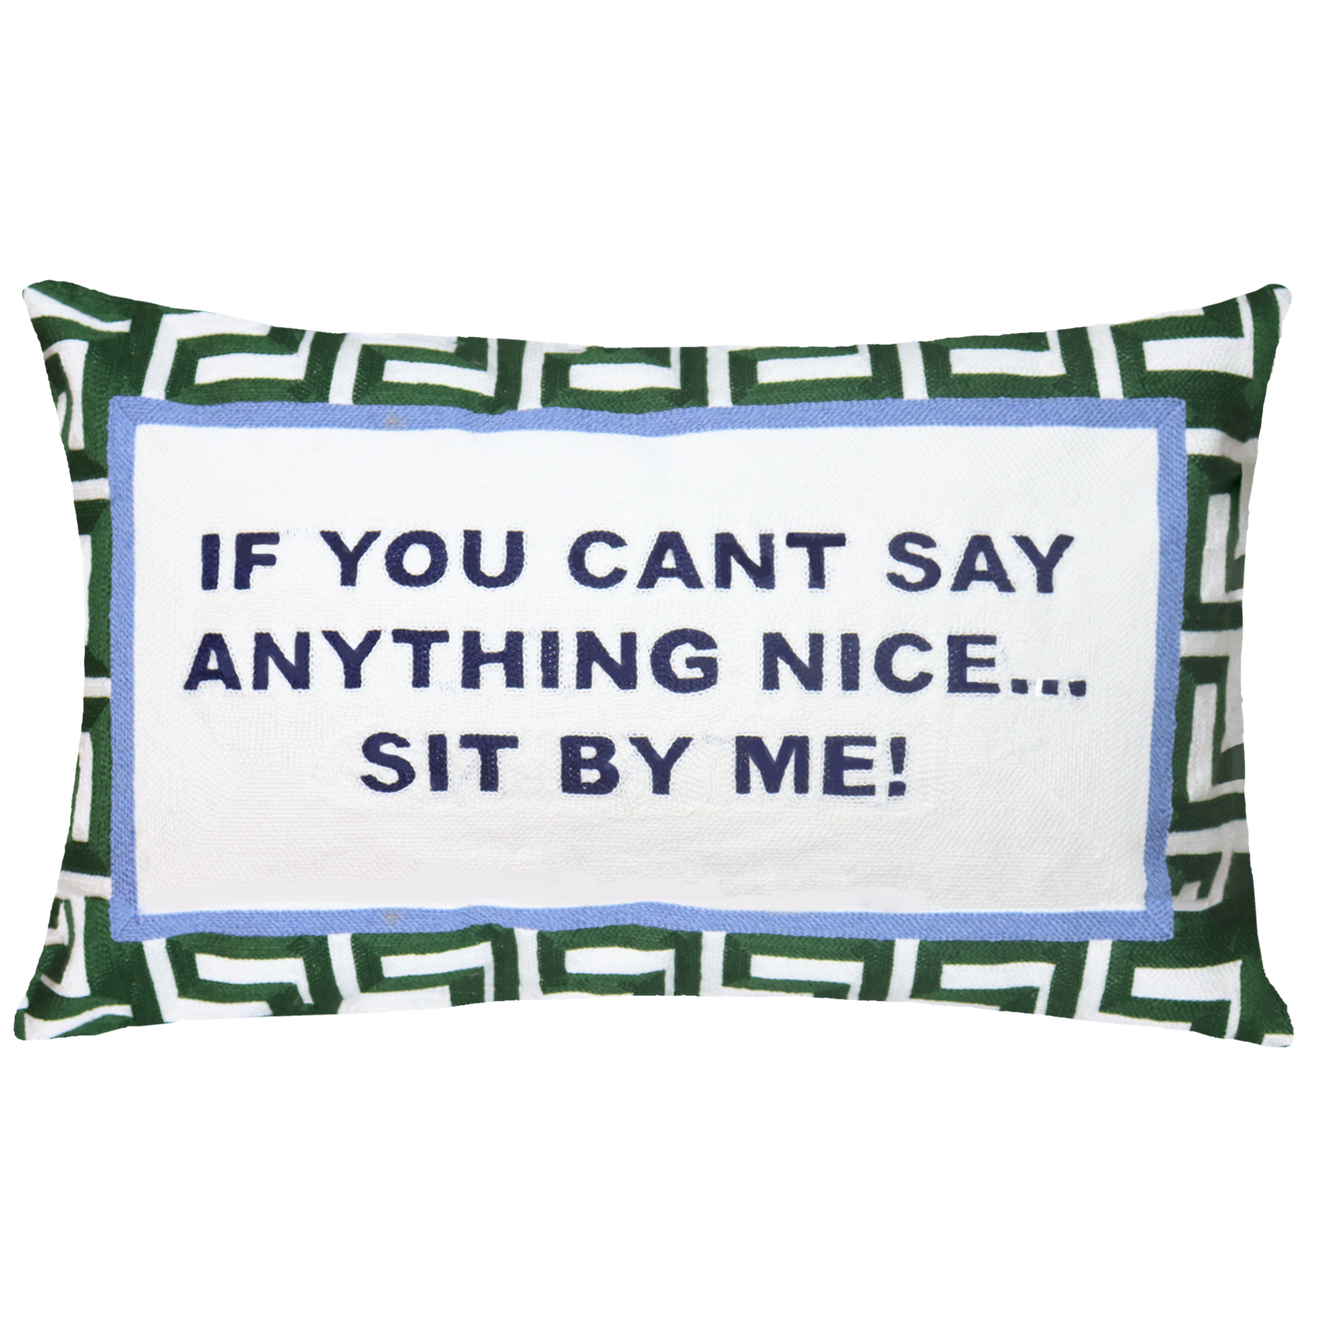 If You Can't Say Anything Nice...Sit By Me